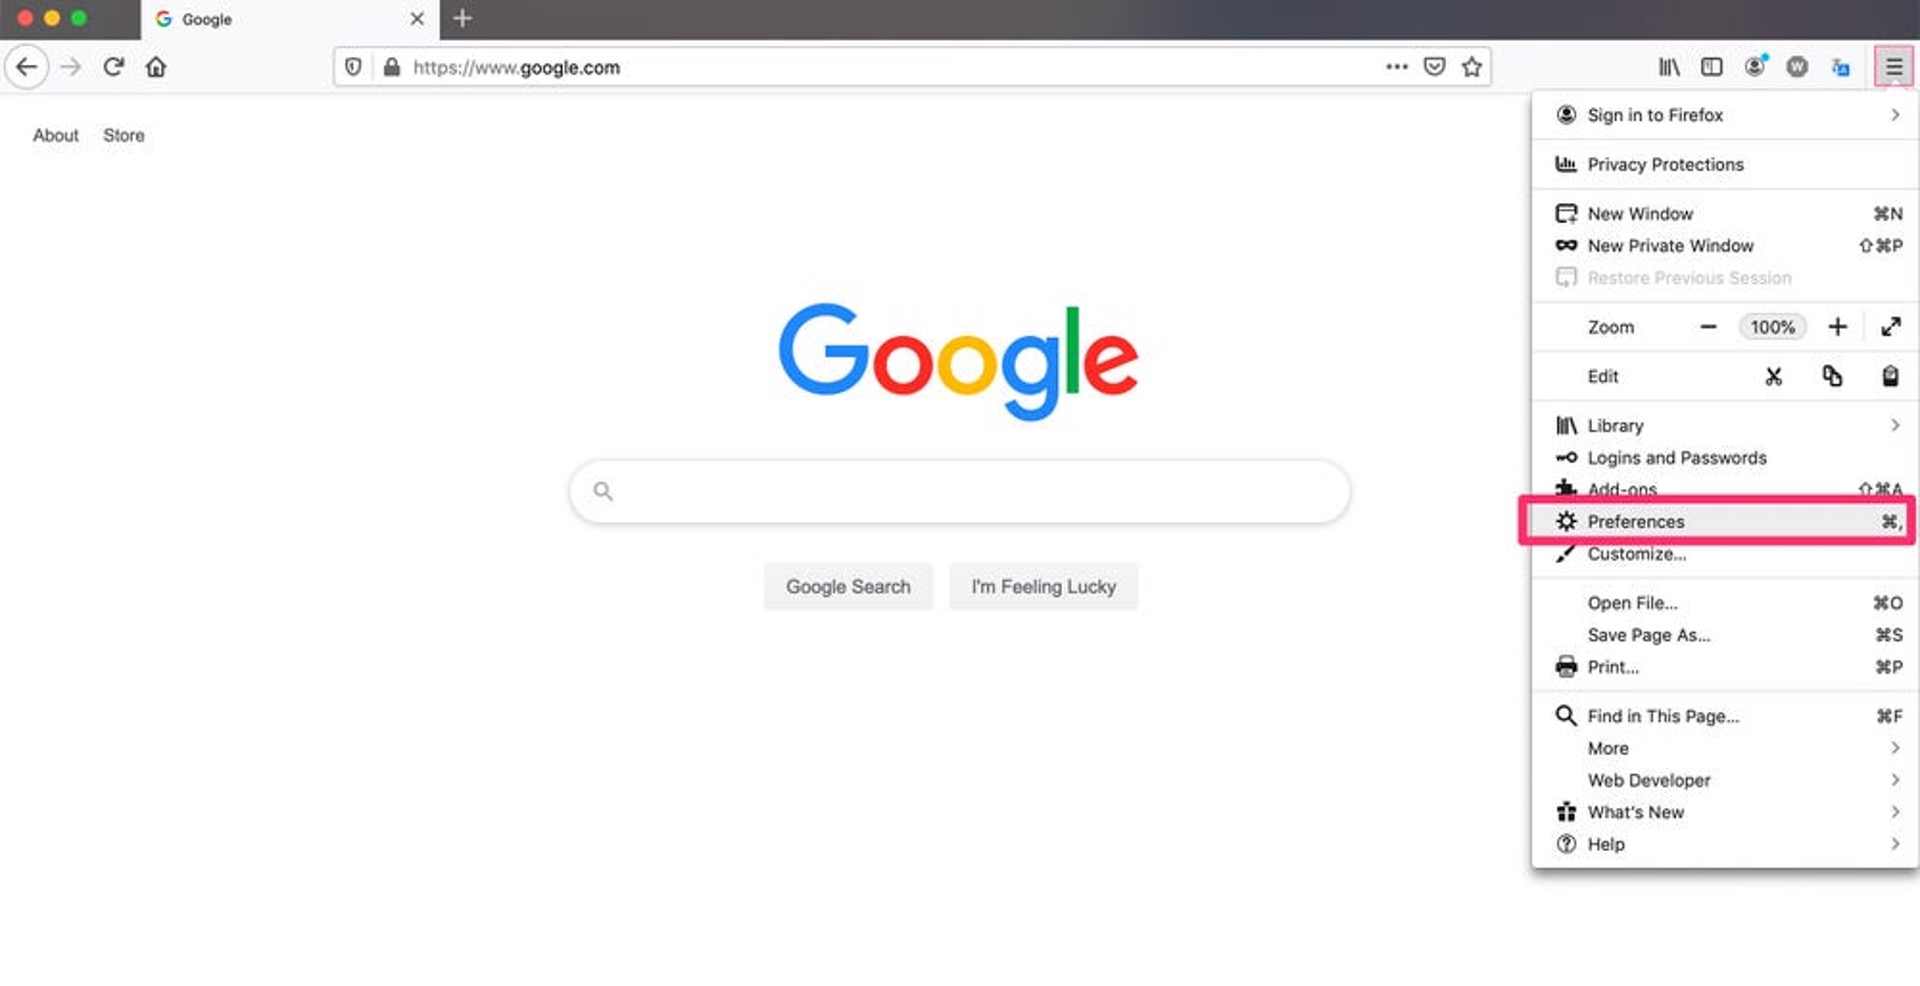 How To Make Google The Homepage On Firefox